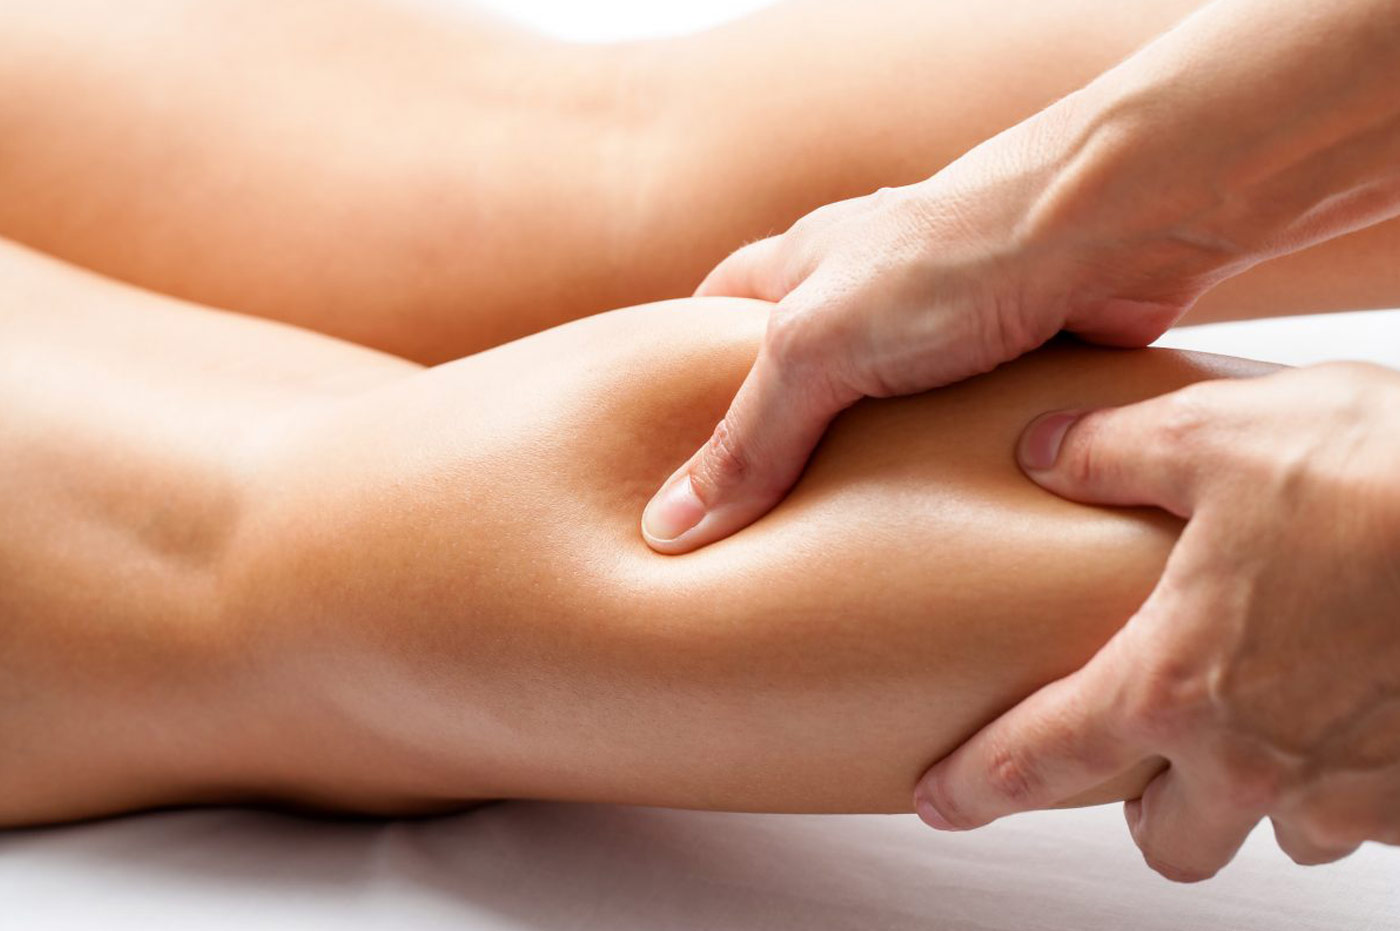 What is massage therapy?